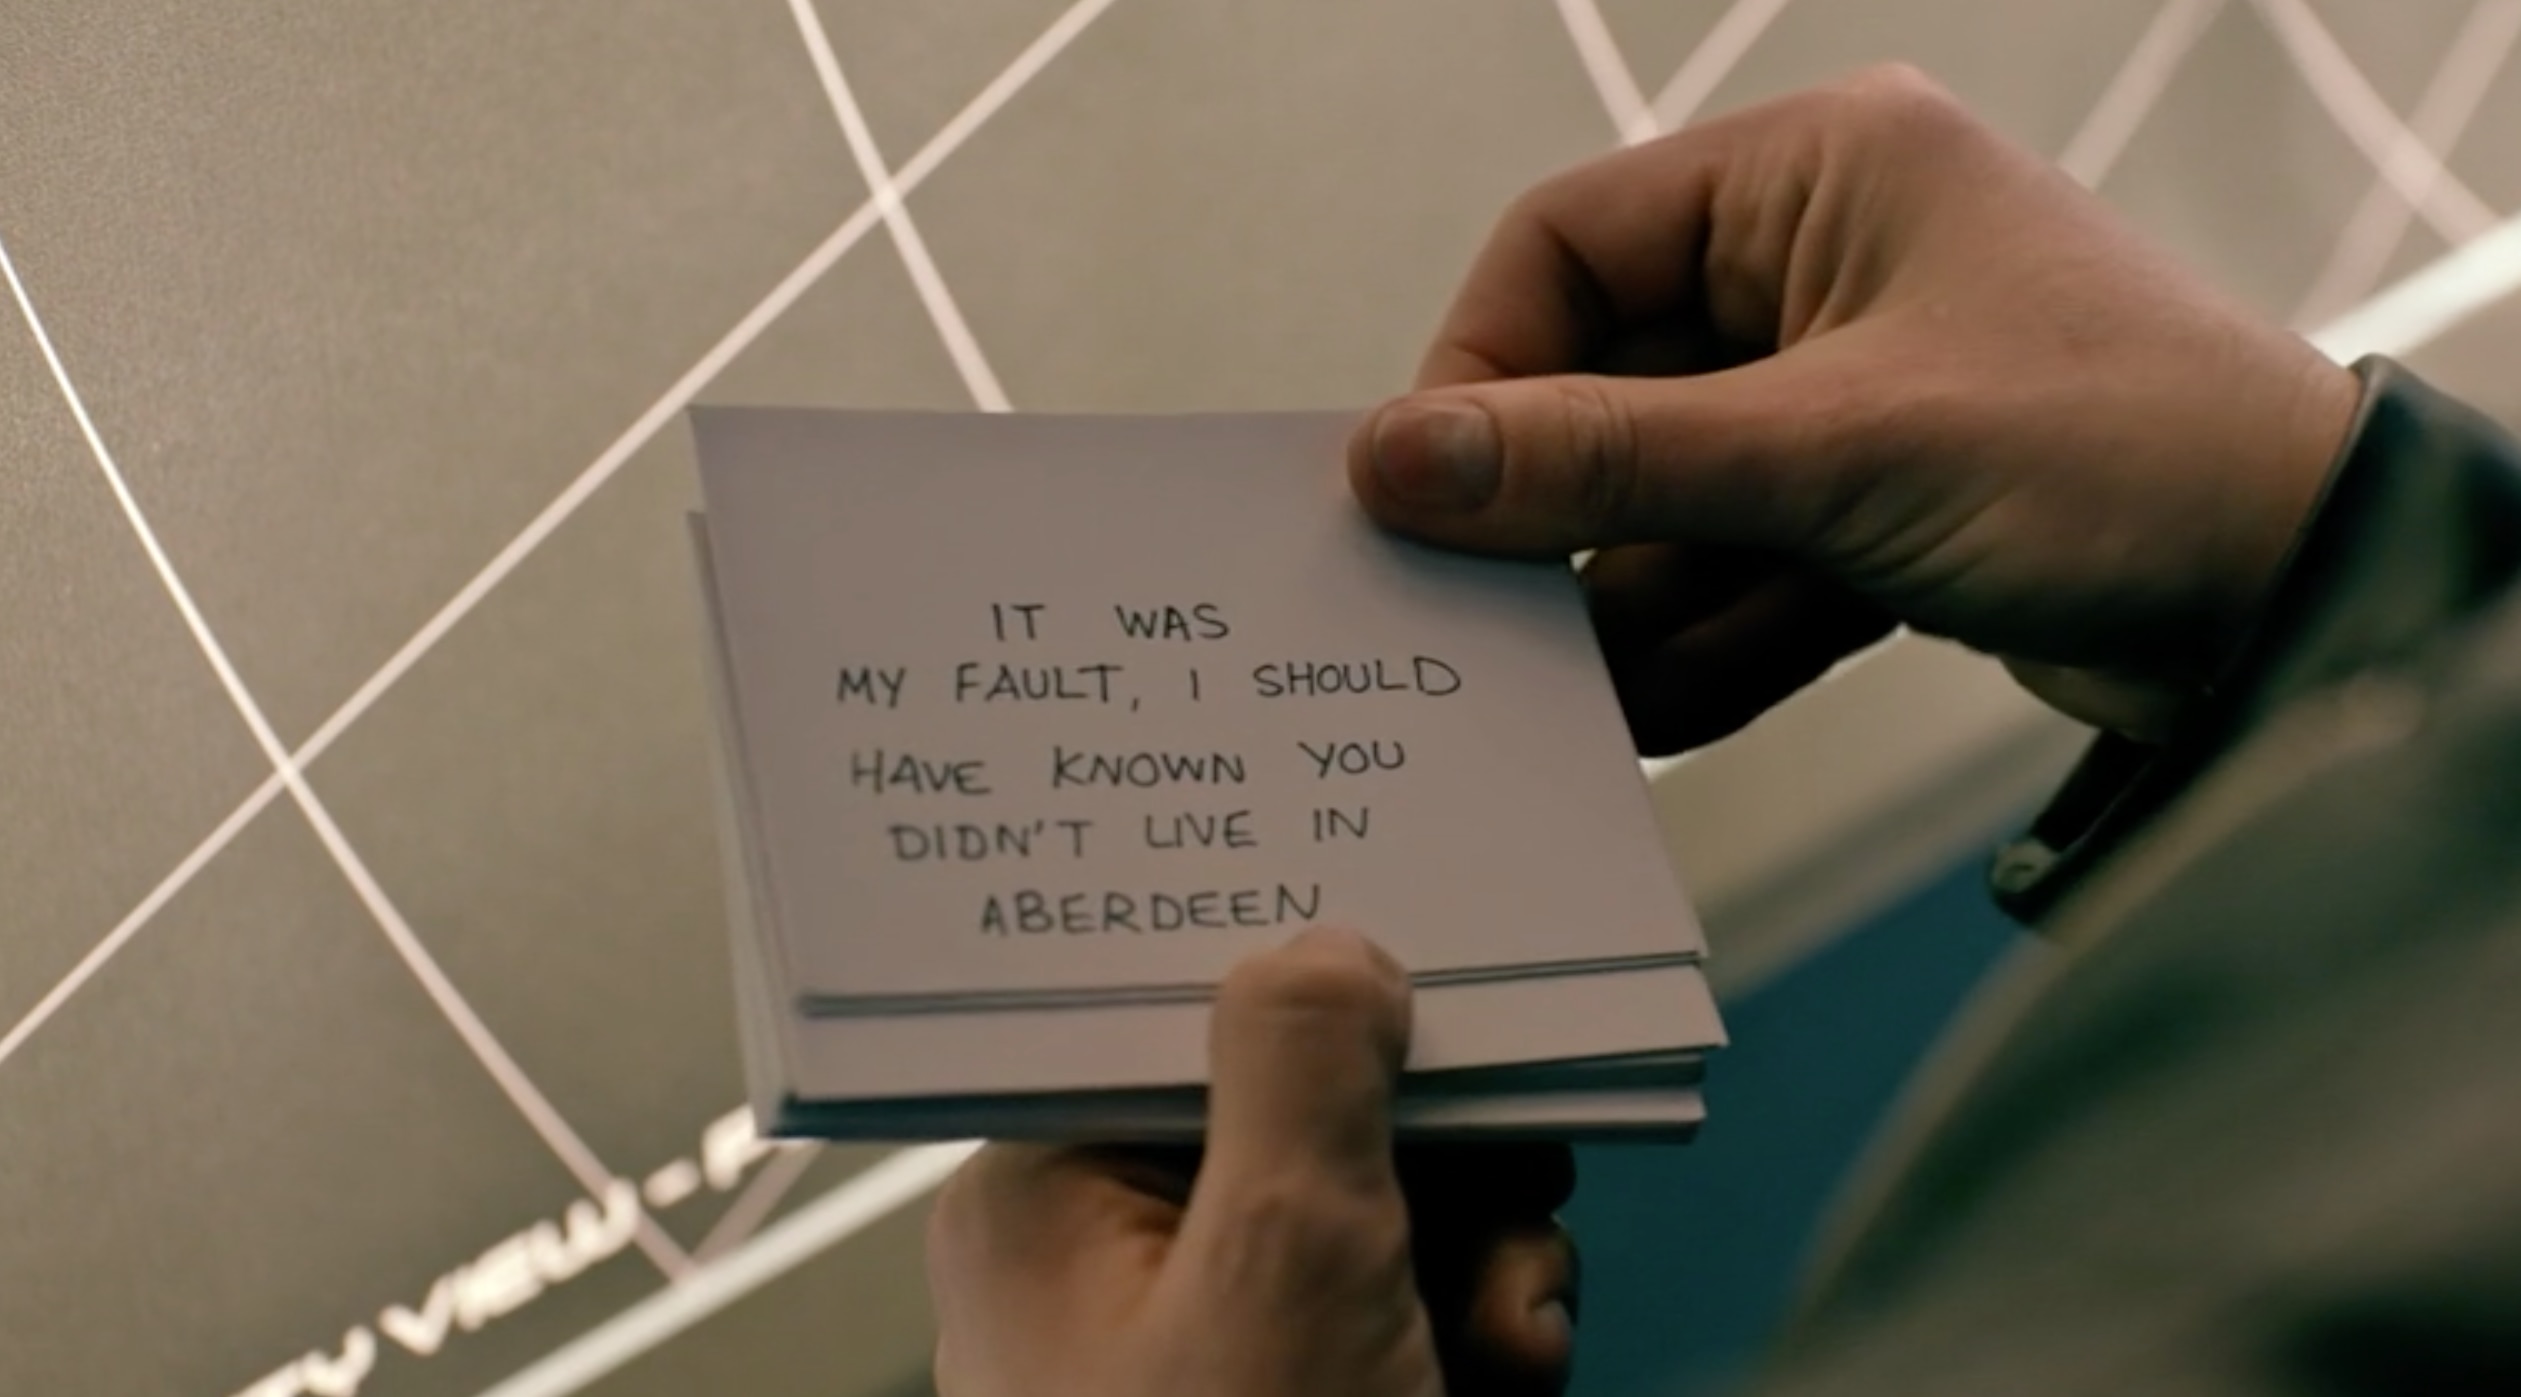 a card that reads “It's my fault, I should have known you didn't live in Aberdeen.”